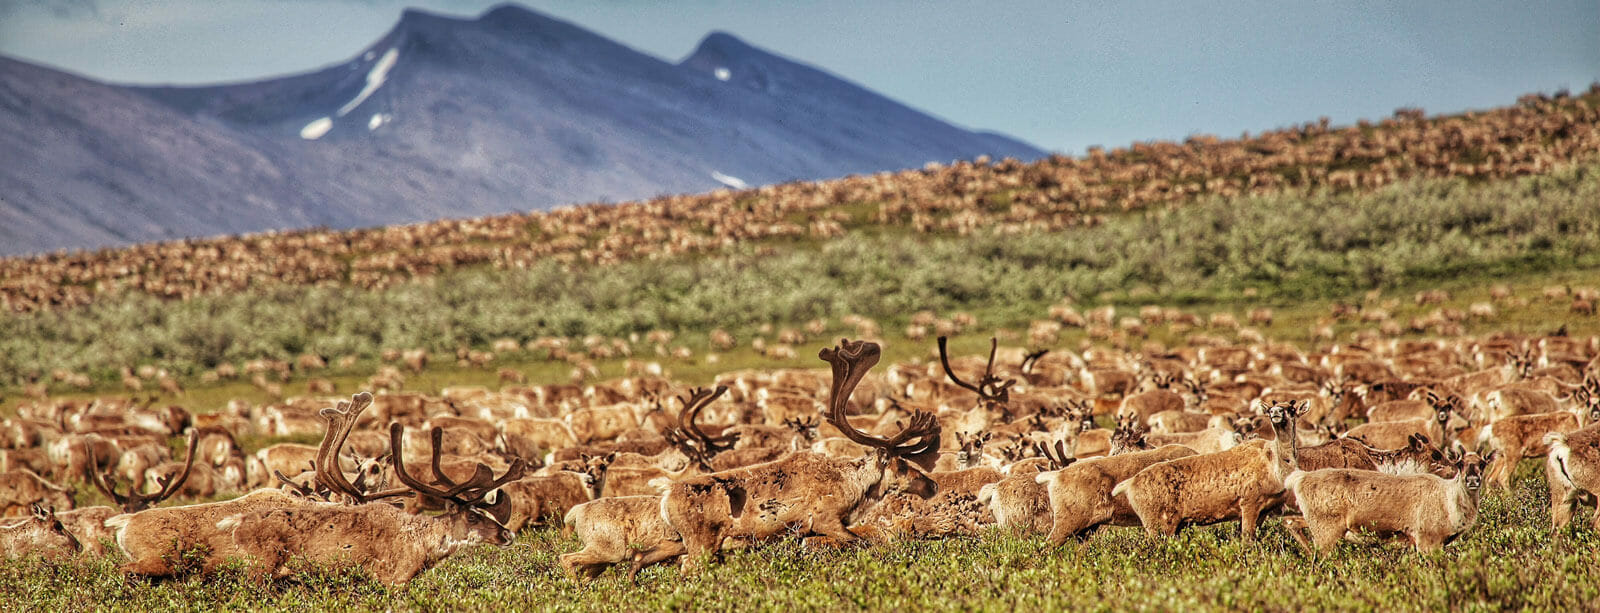 caribou in the arctic refuge